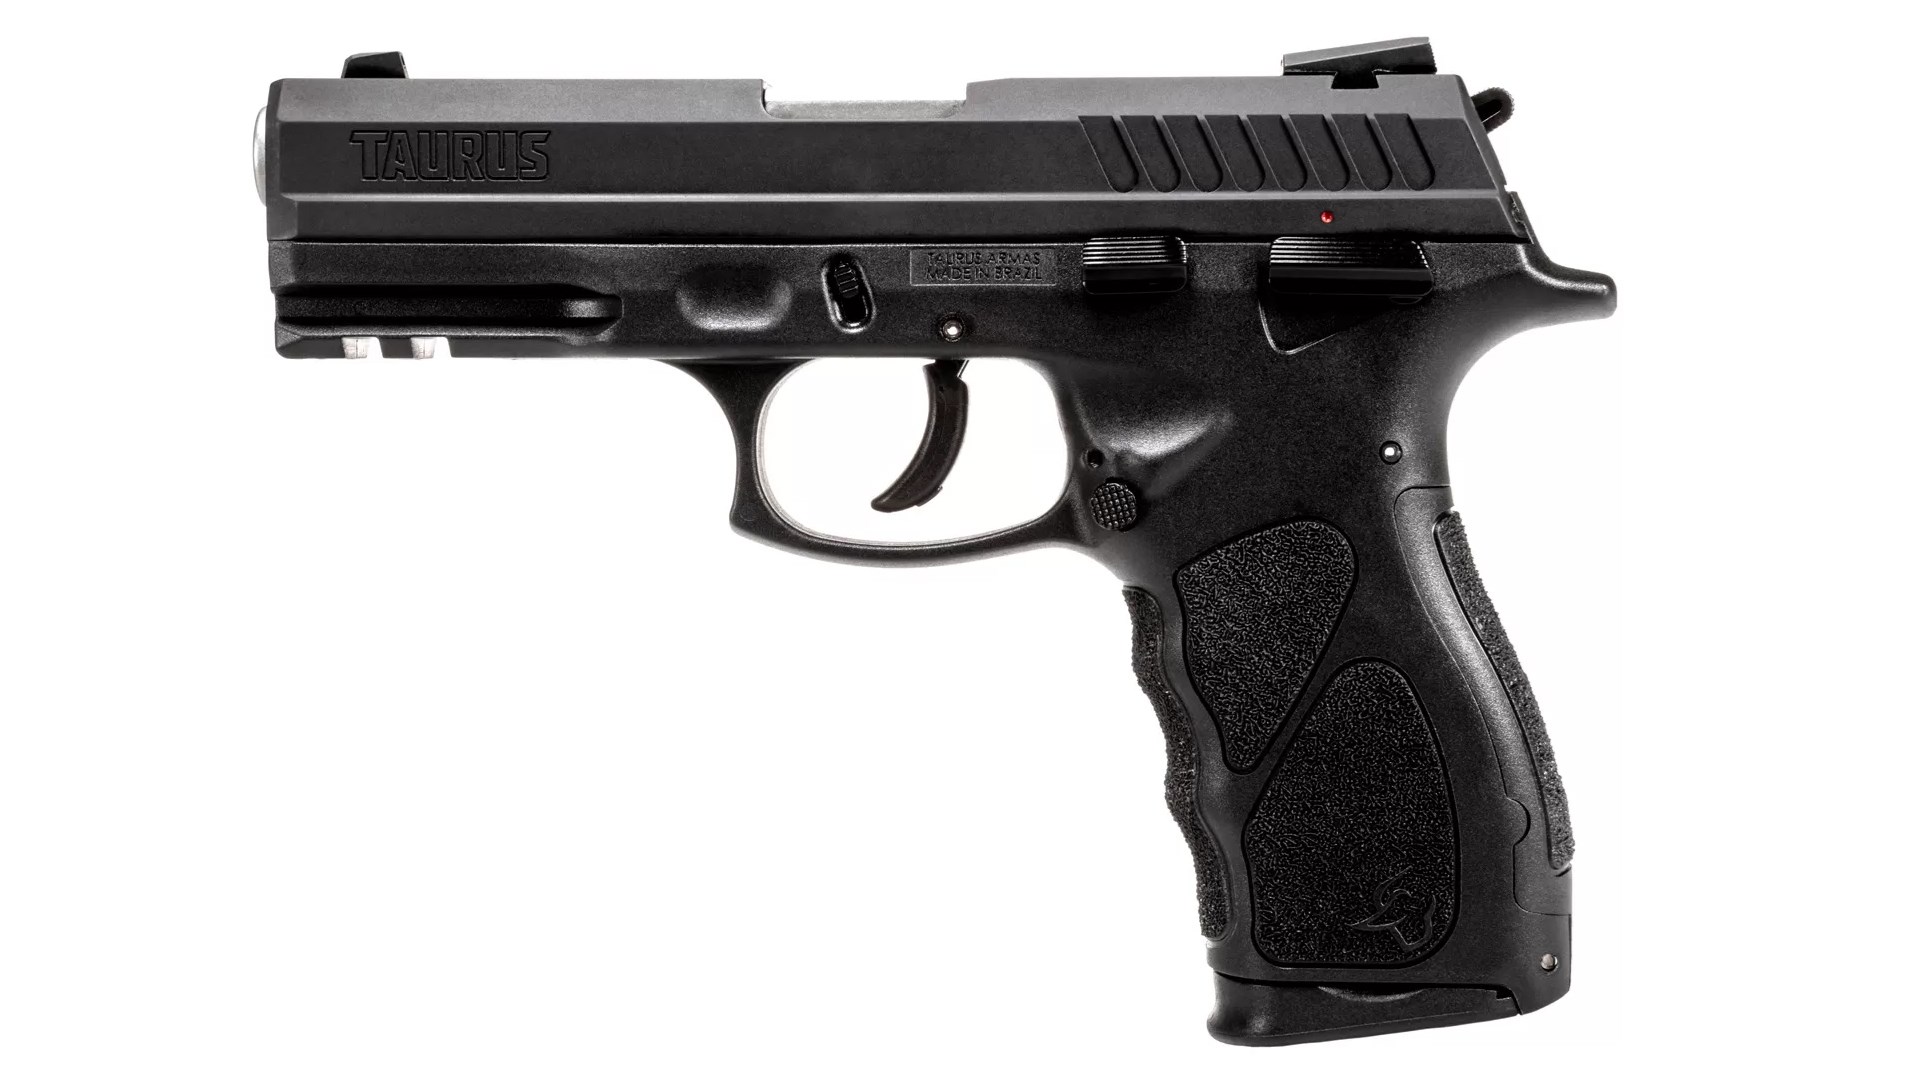 Left side of the all-black Taurus TH45 pistol in .45 ACP.